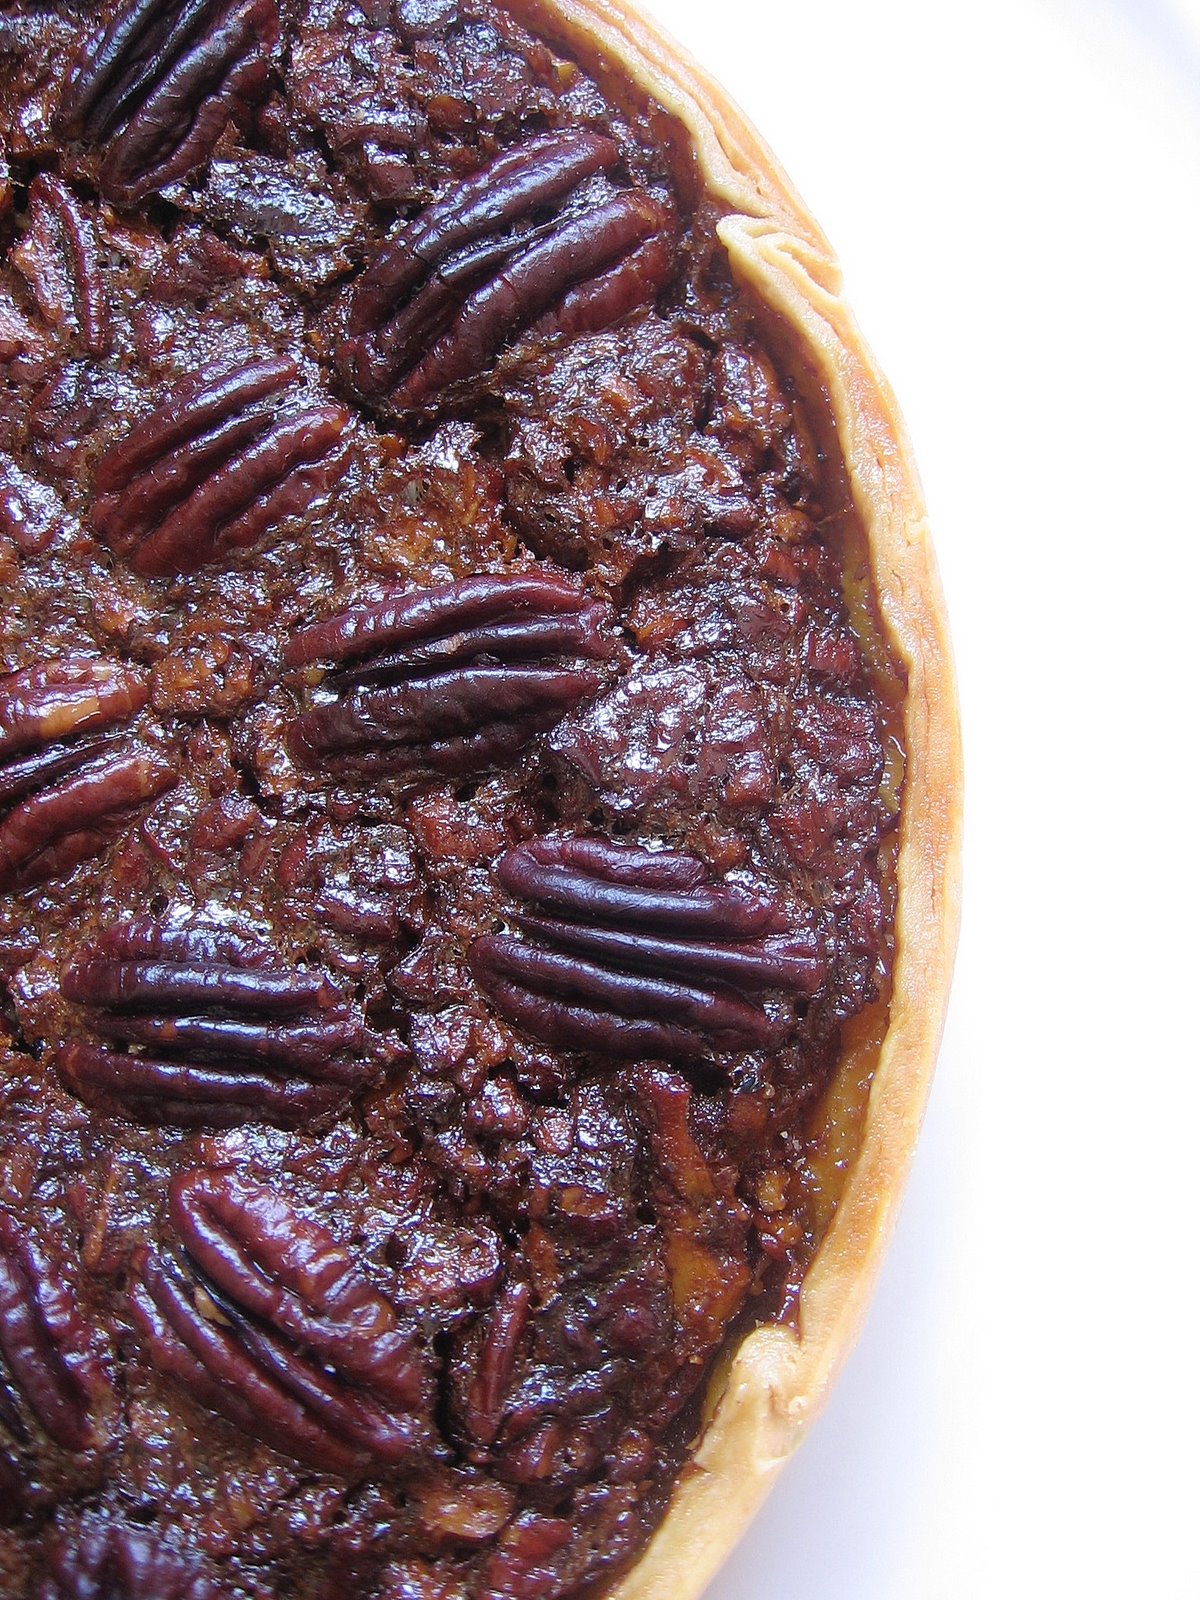 Diving Back into Sweets with a Pecan Tart